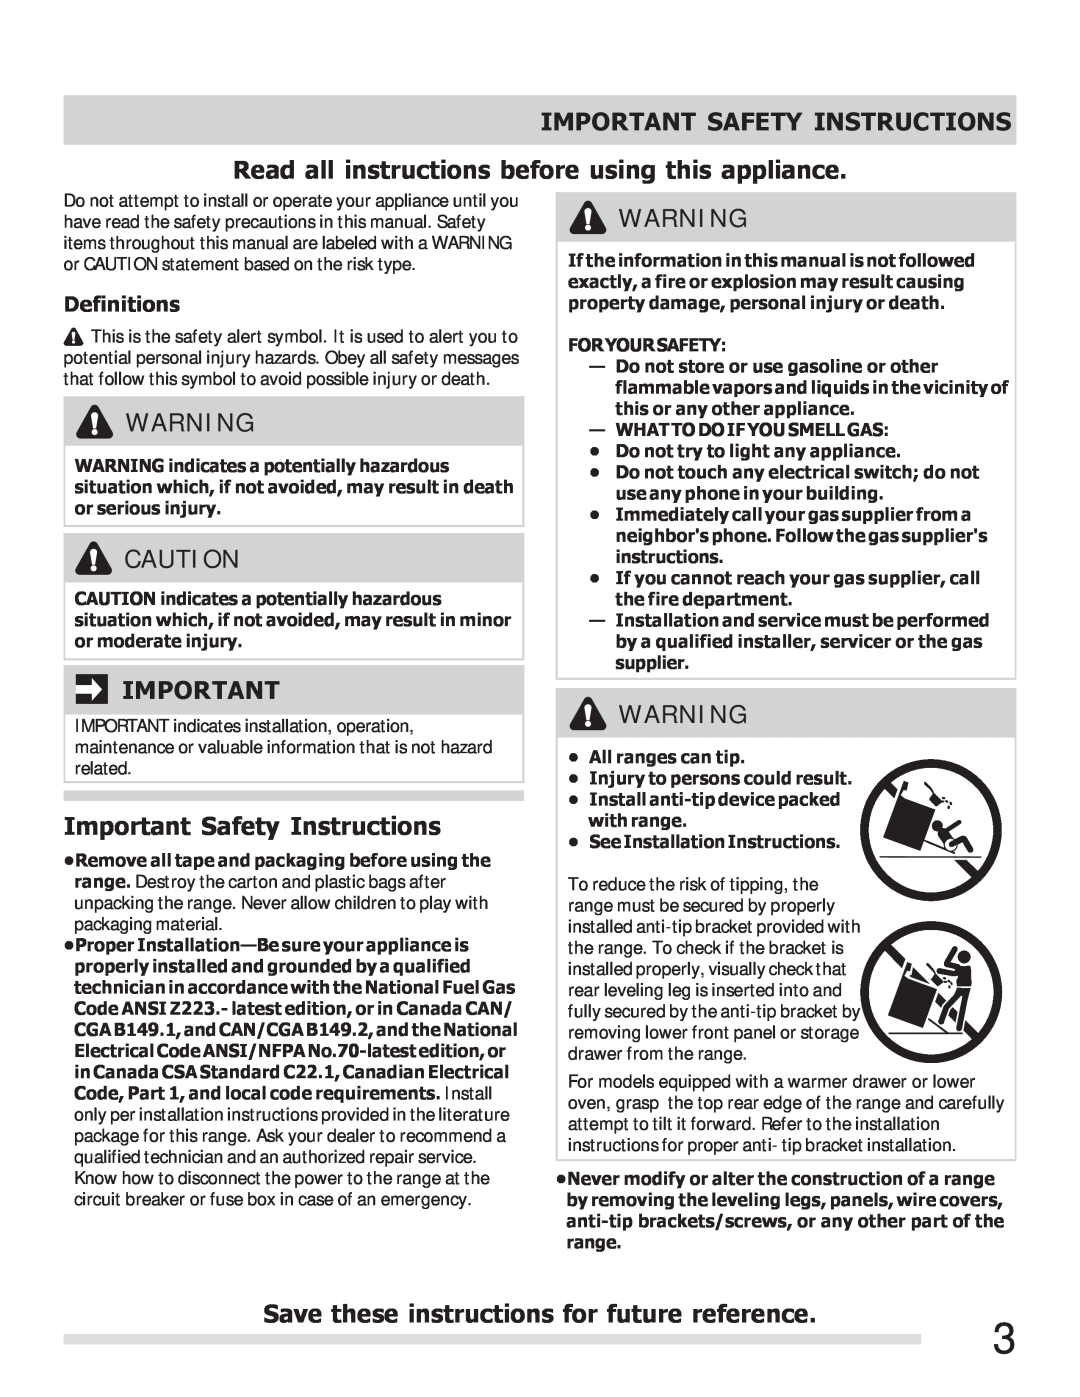 Frigidaire FFGF3011LB Important Safety Instructions, Read all instructions before using this appliance, Definitions 